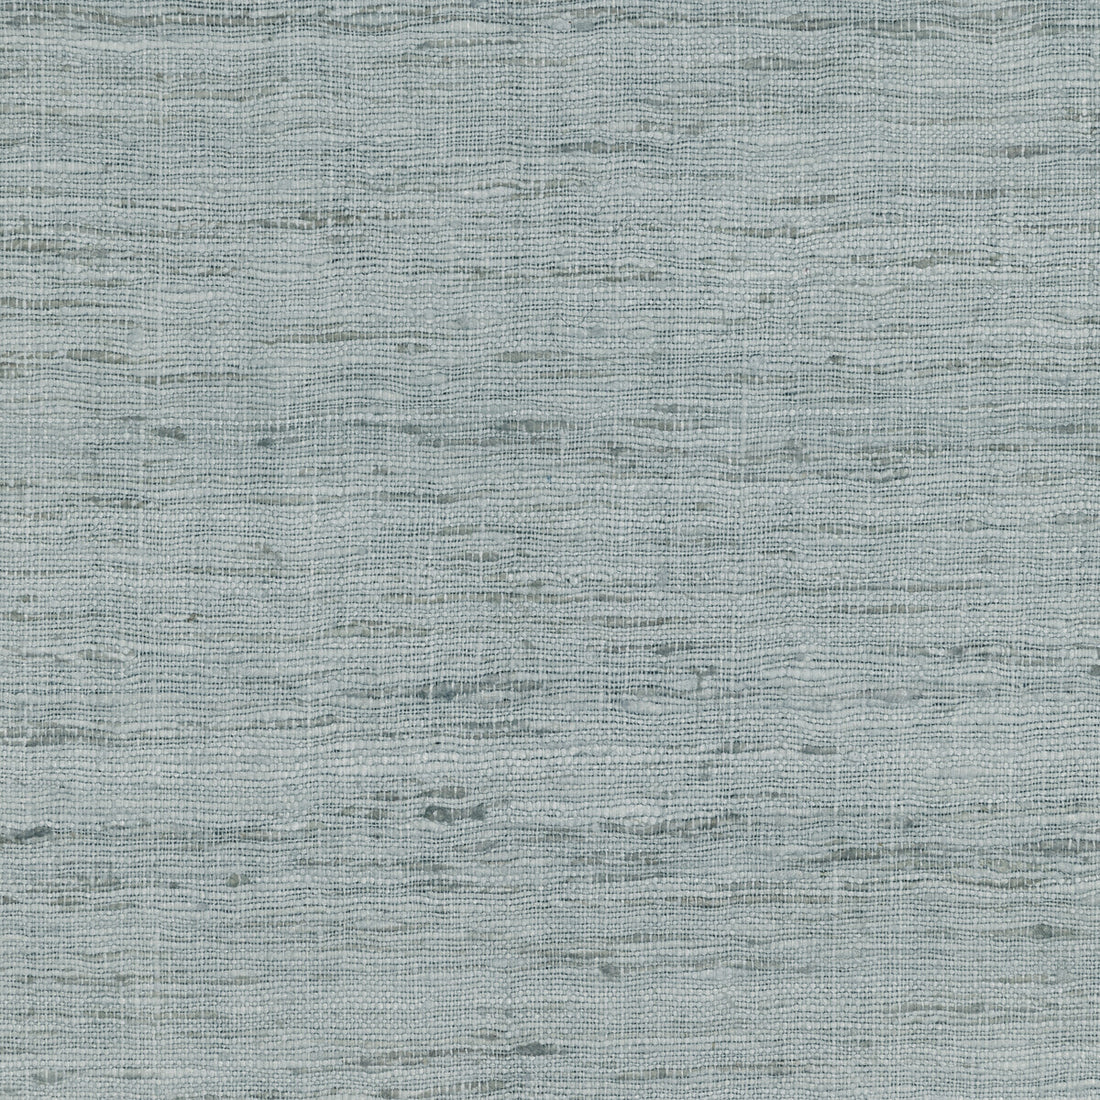 Sonoma fabric in hazy color - pattern GWF-3109.15.0 - by Lee Jofa Modern in the Kelly Wearstler VI collection